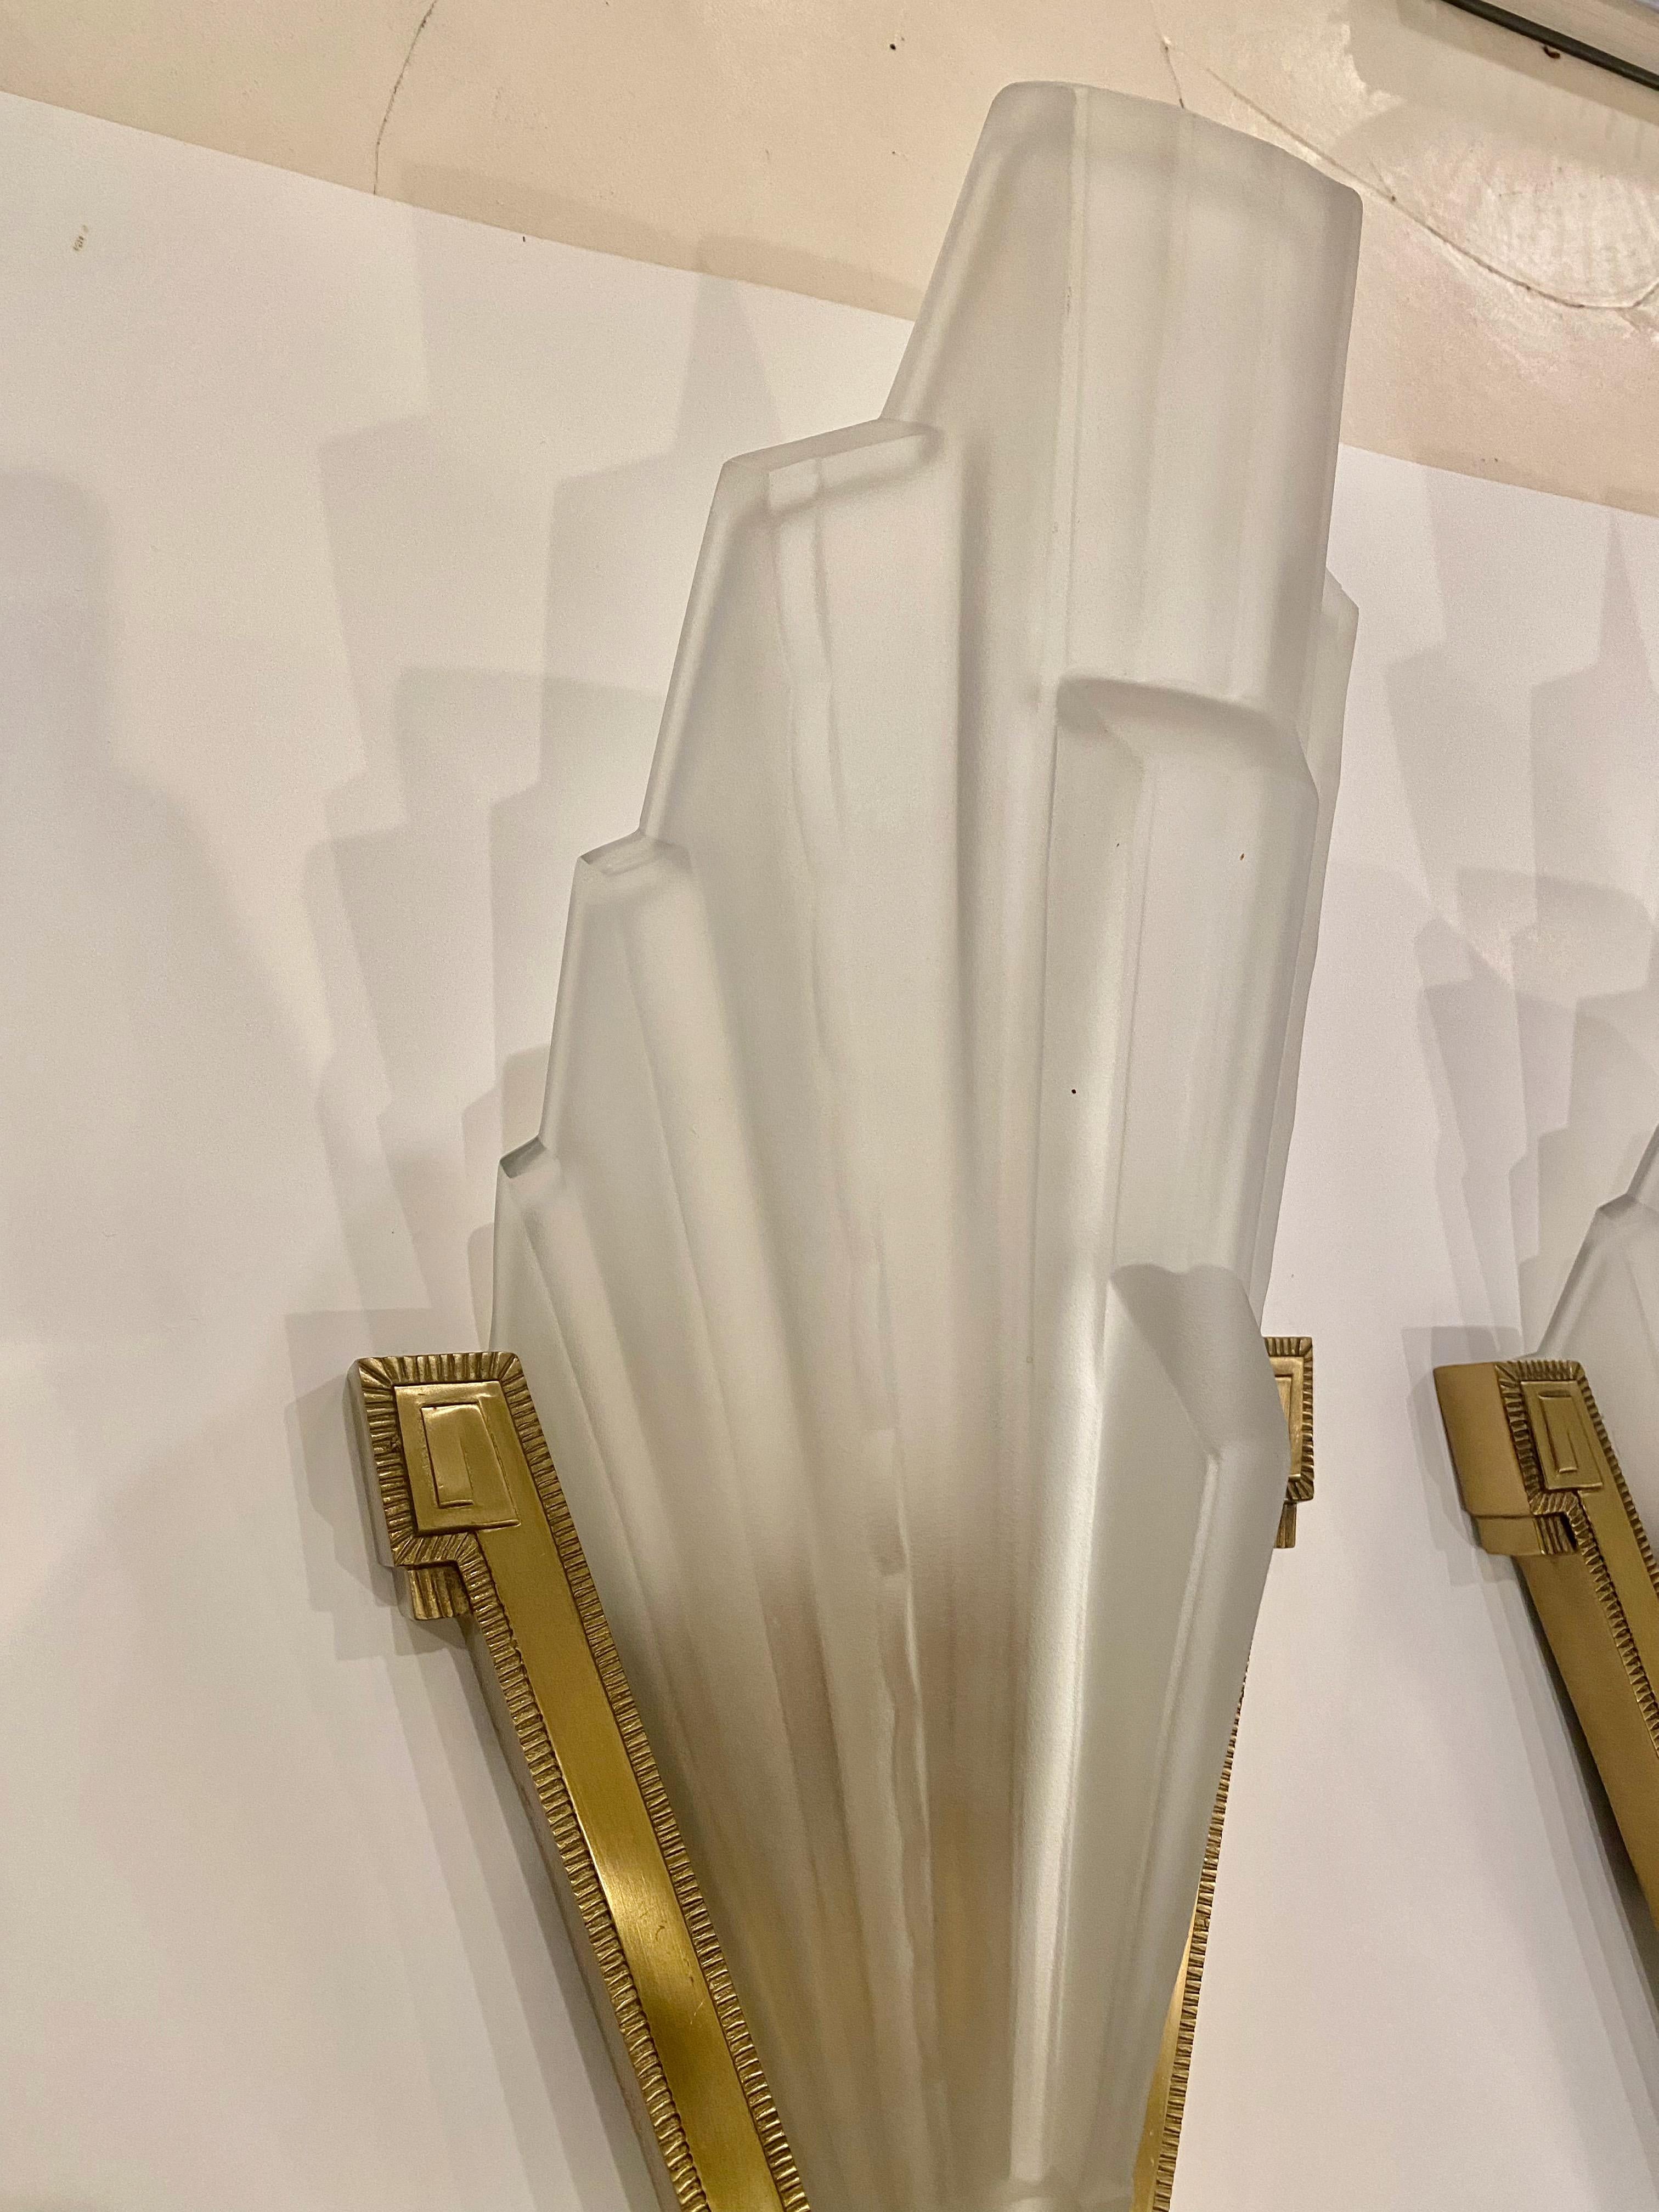 Early 20th Century Pair of Large French Art Deco Skyscraper Sconces by Sabino For Sale